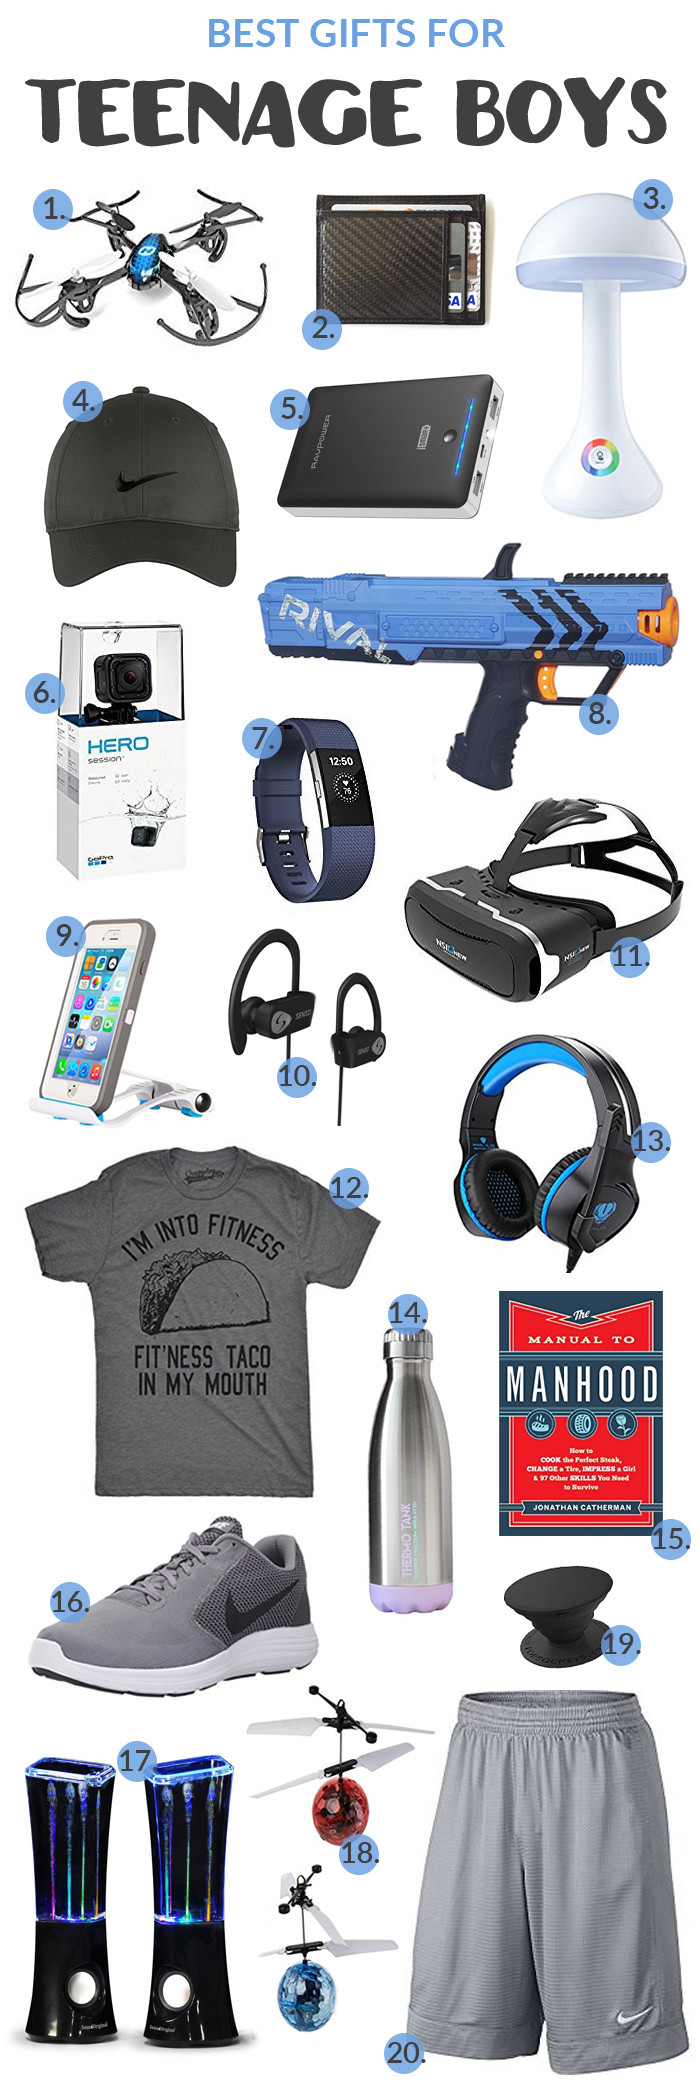 Top Gift Ideas For Boys
 Best Gifts for Teenage Boys